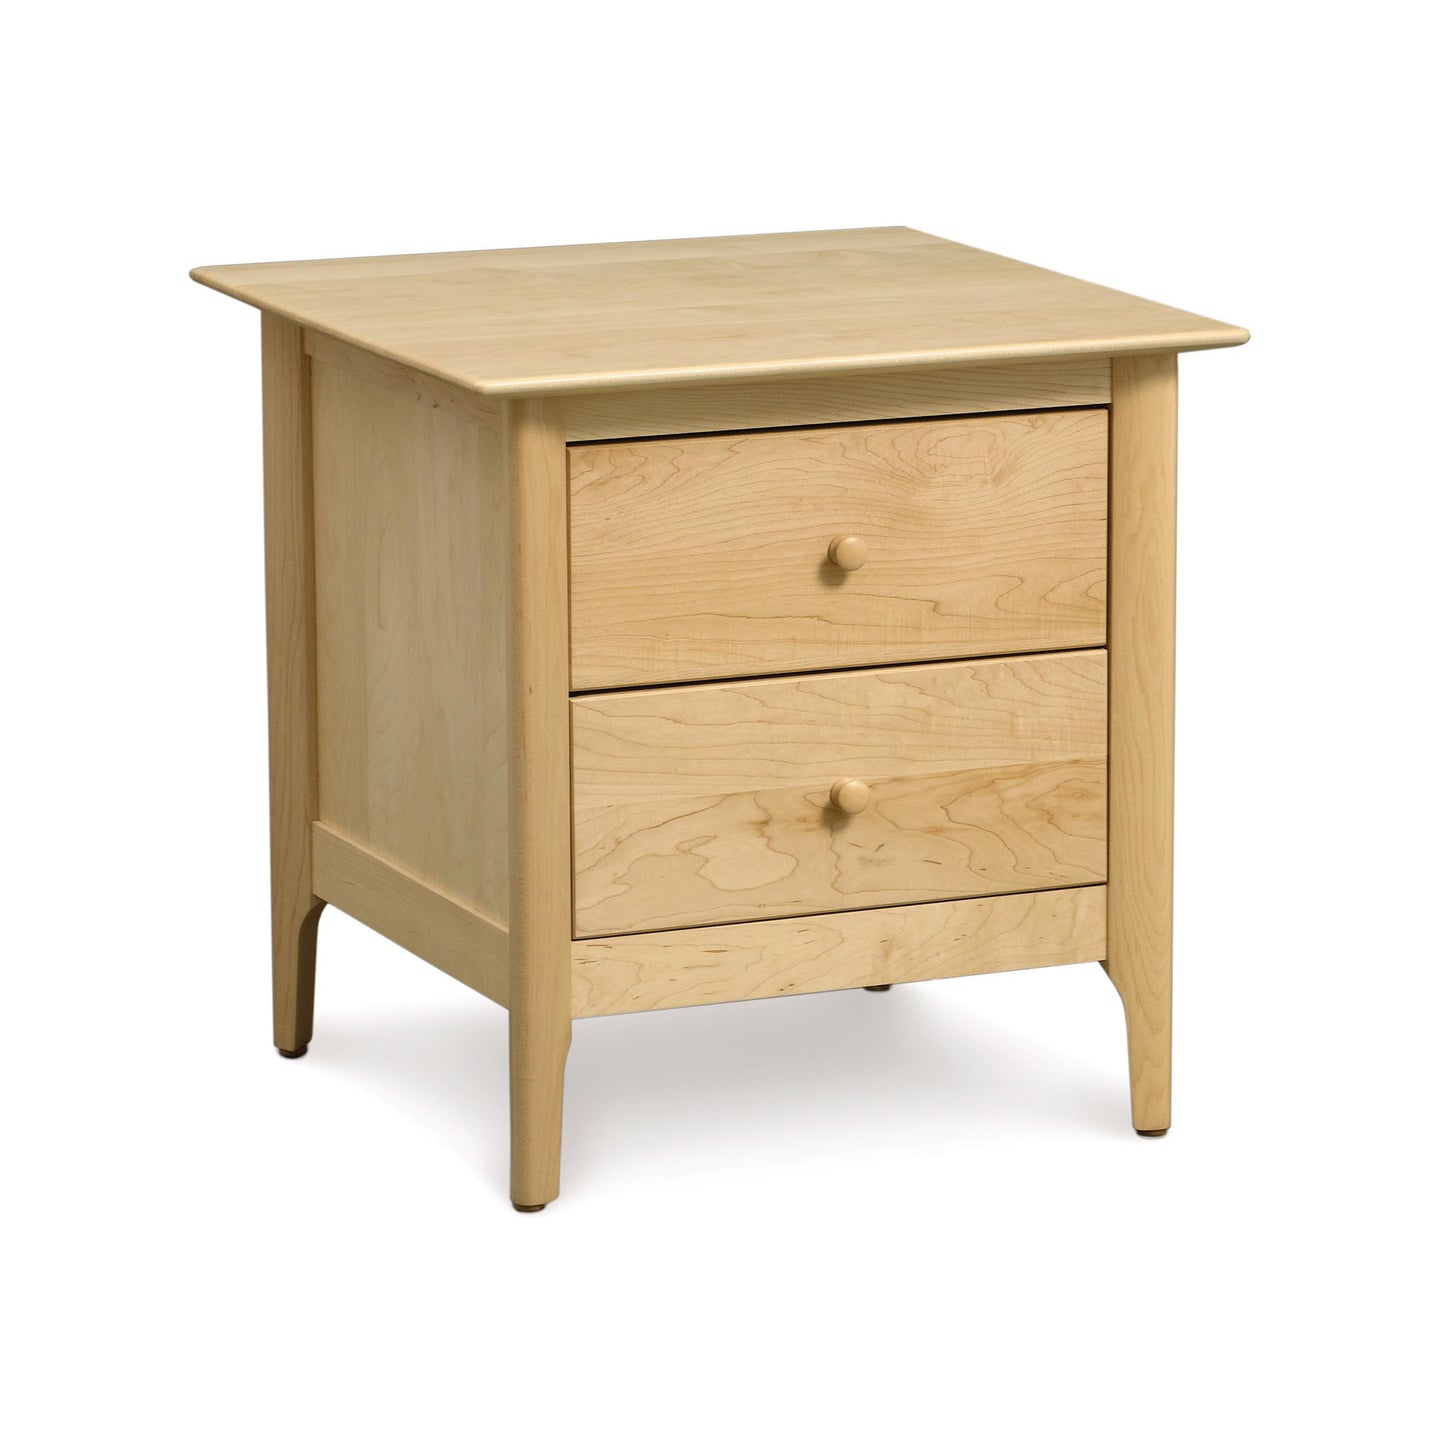 A Sarah 2-Drawer Nightstand, made by Copeland Furniture from sustainable harvested wood, isolated on a white background.